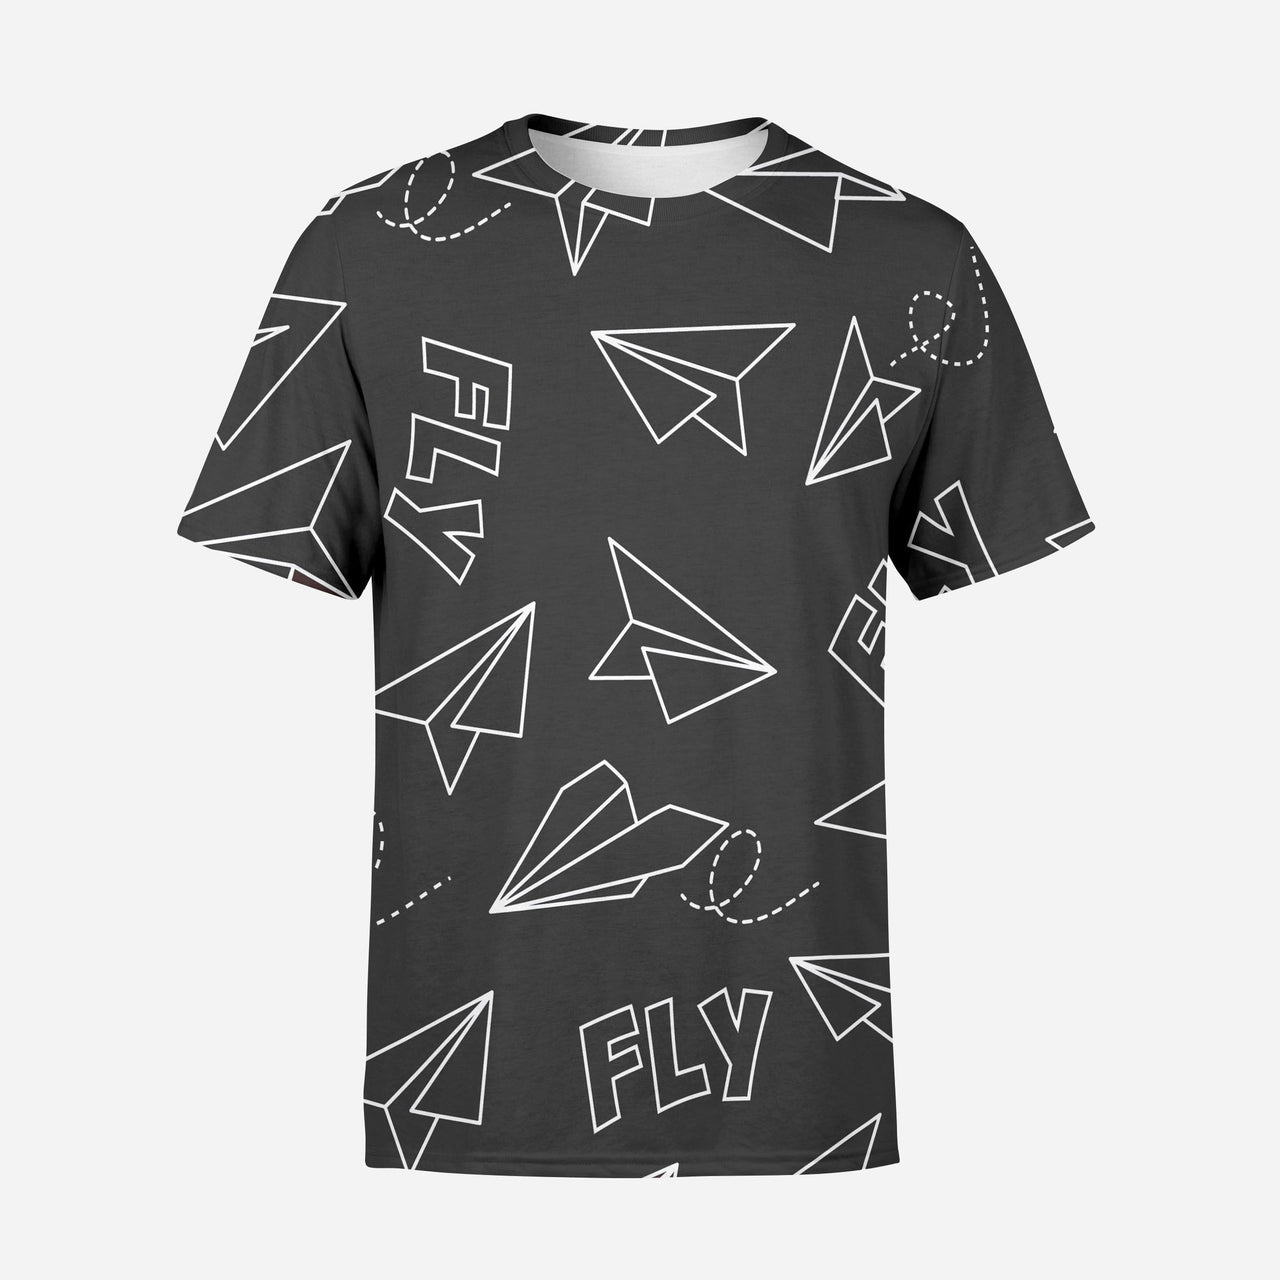 Paper Airplane & Fly (Gray) Designed 3D T-Shirts